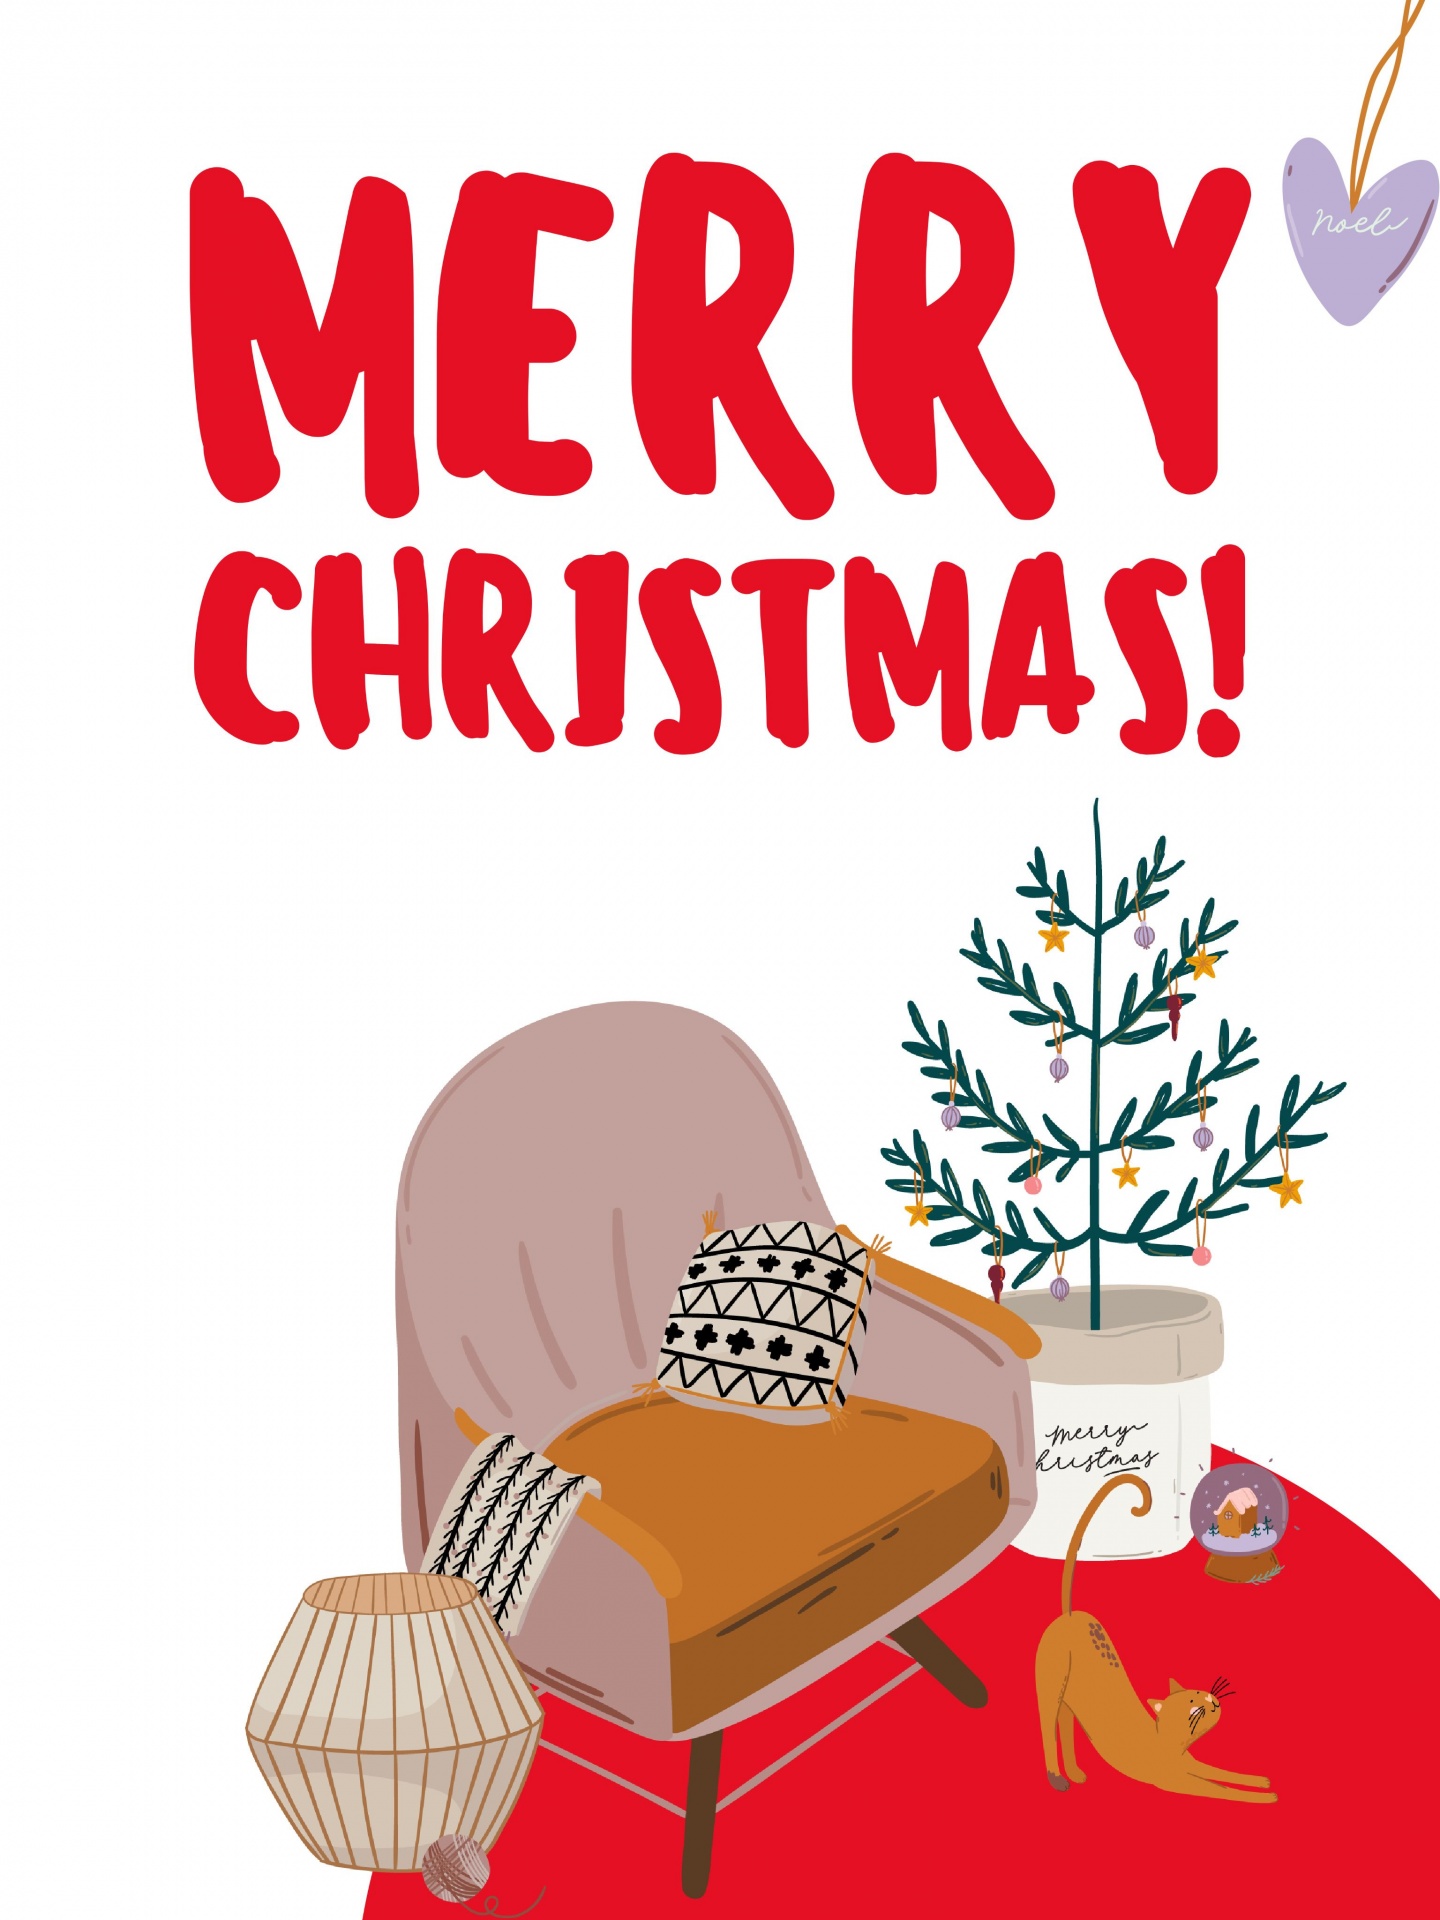 Christmas illustration with Merry Christmas greeting and featuring a cat stretching in front of an easy chair with a Christmas Tree in background